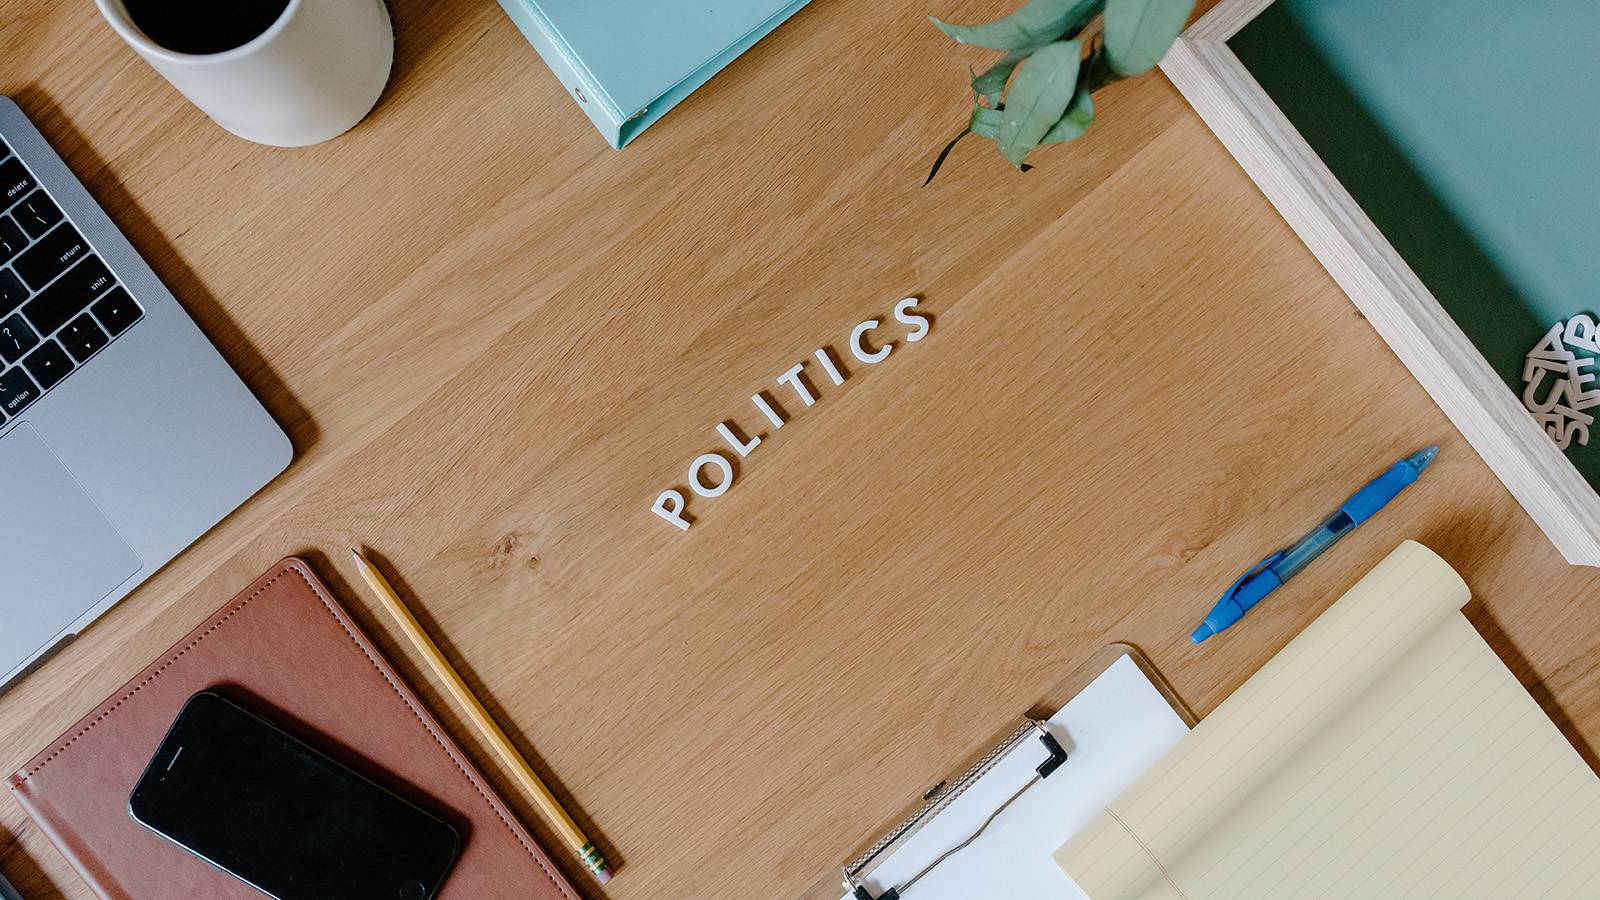 Desk with office supplies and letters that read "politics"